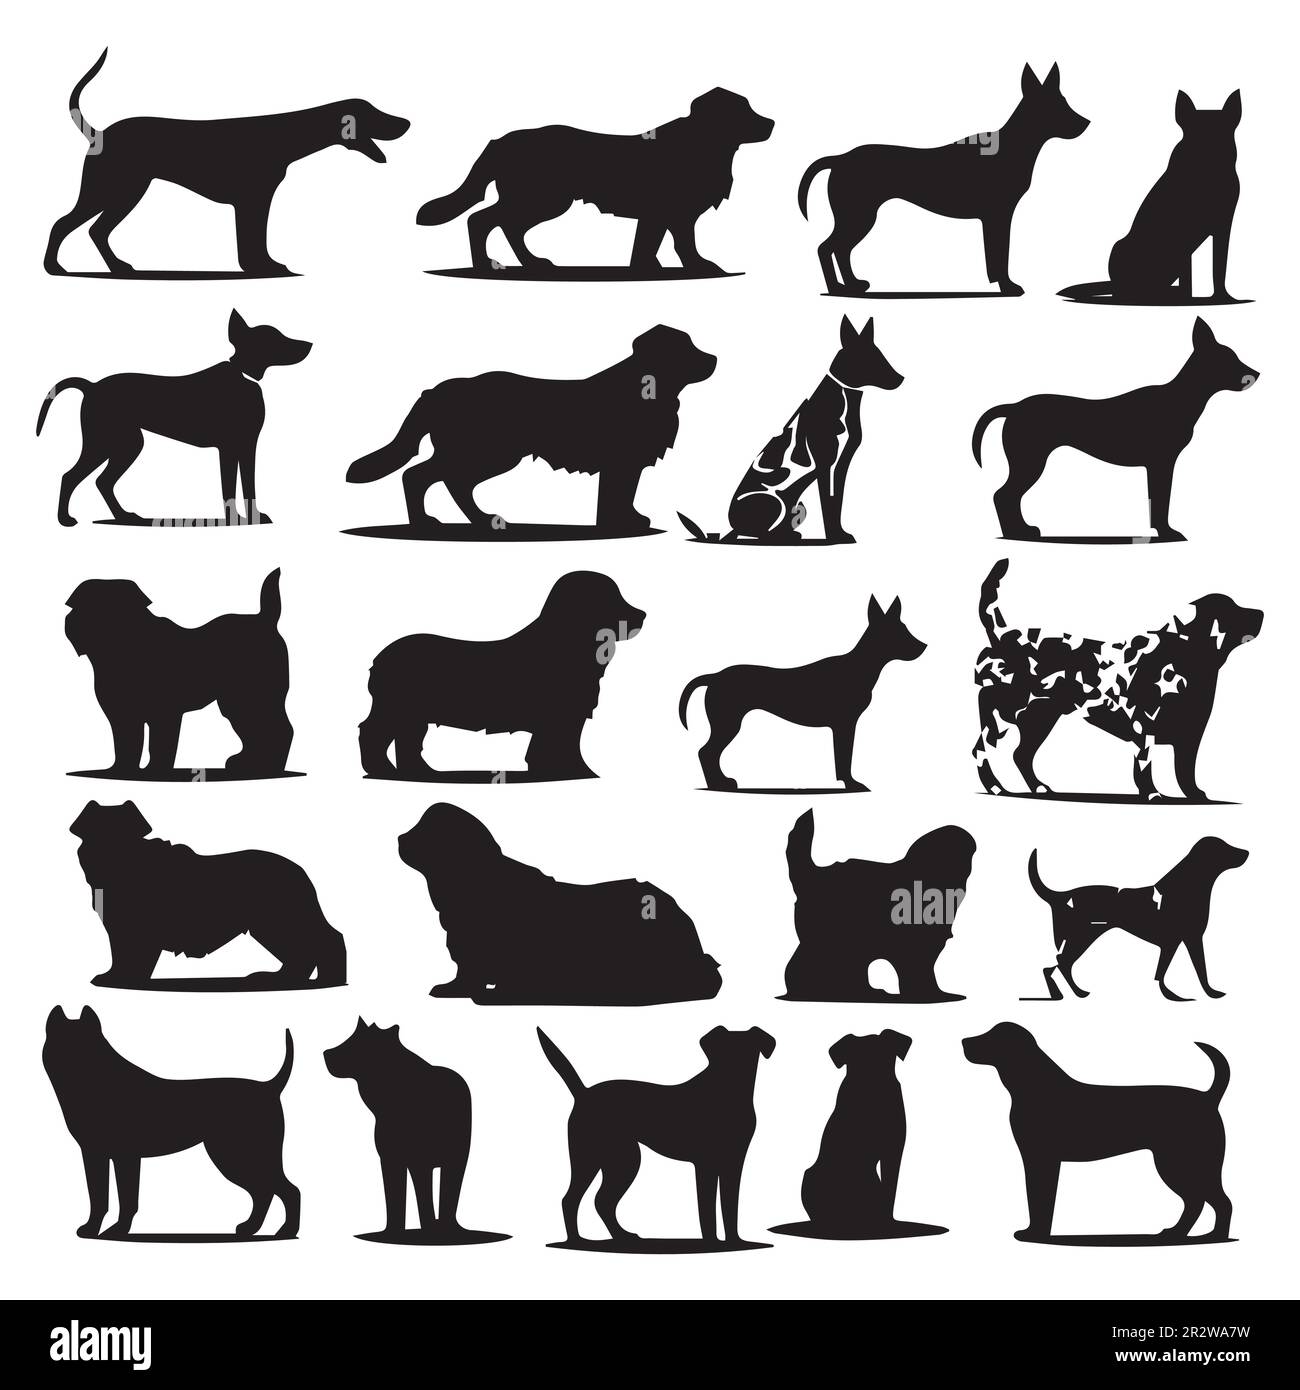 A collection of dogs with different breeds' silhouette vectors. Stock Vector